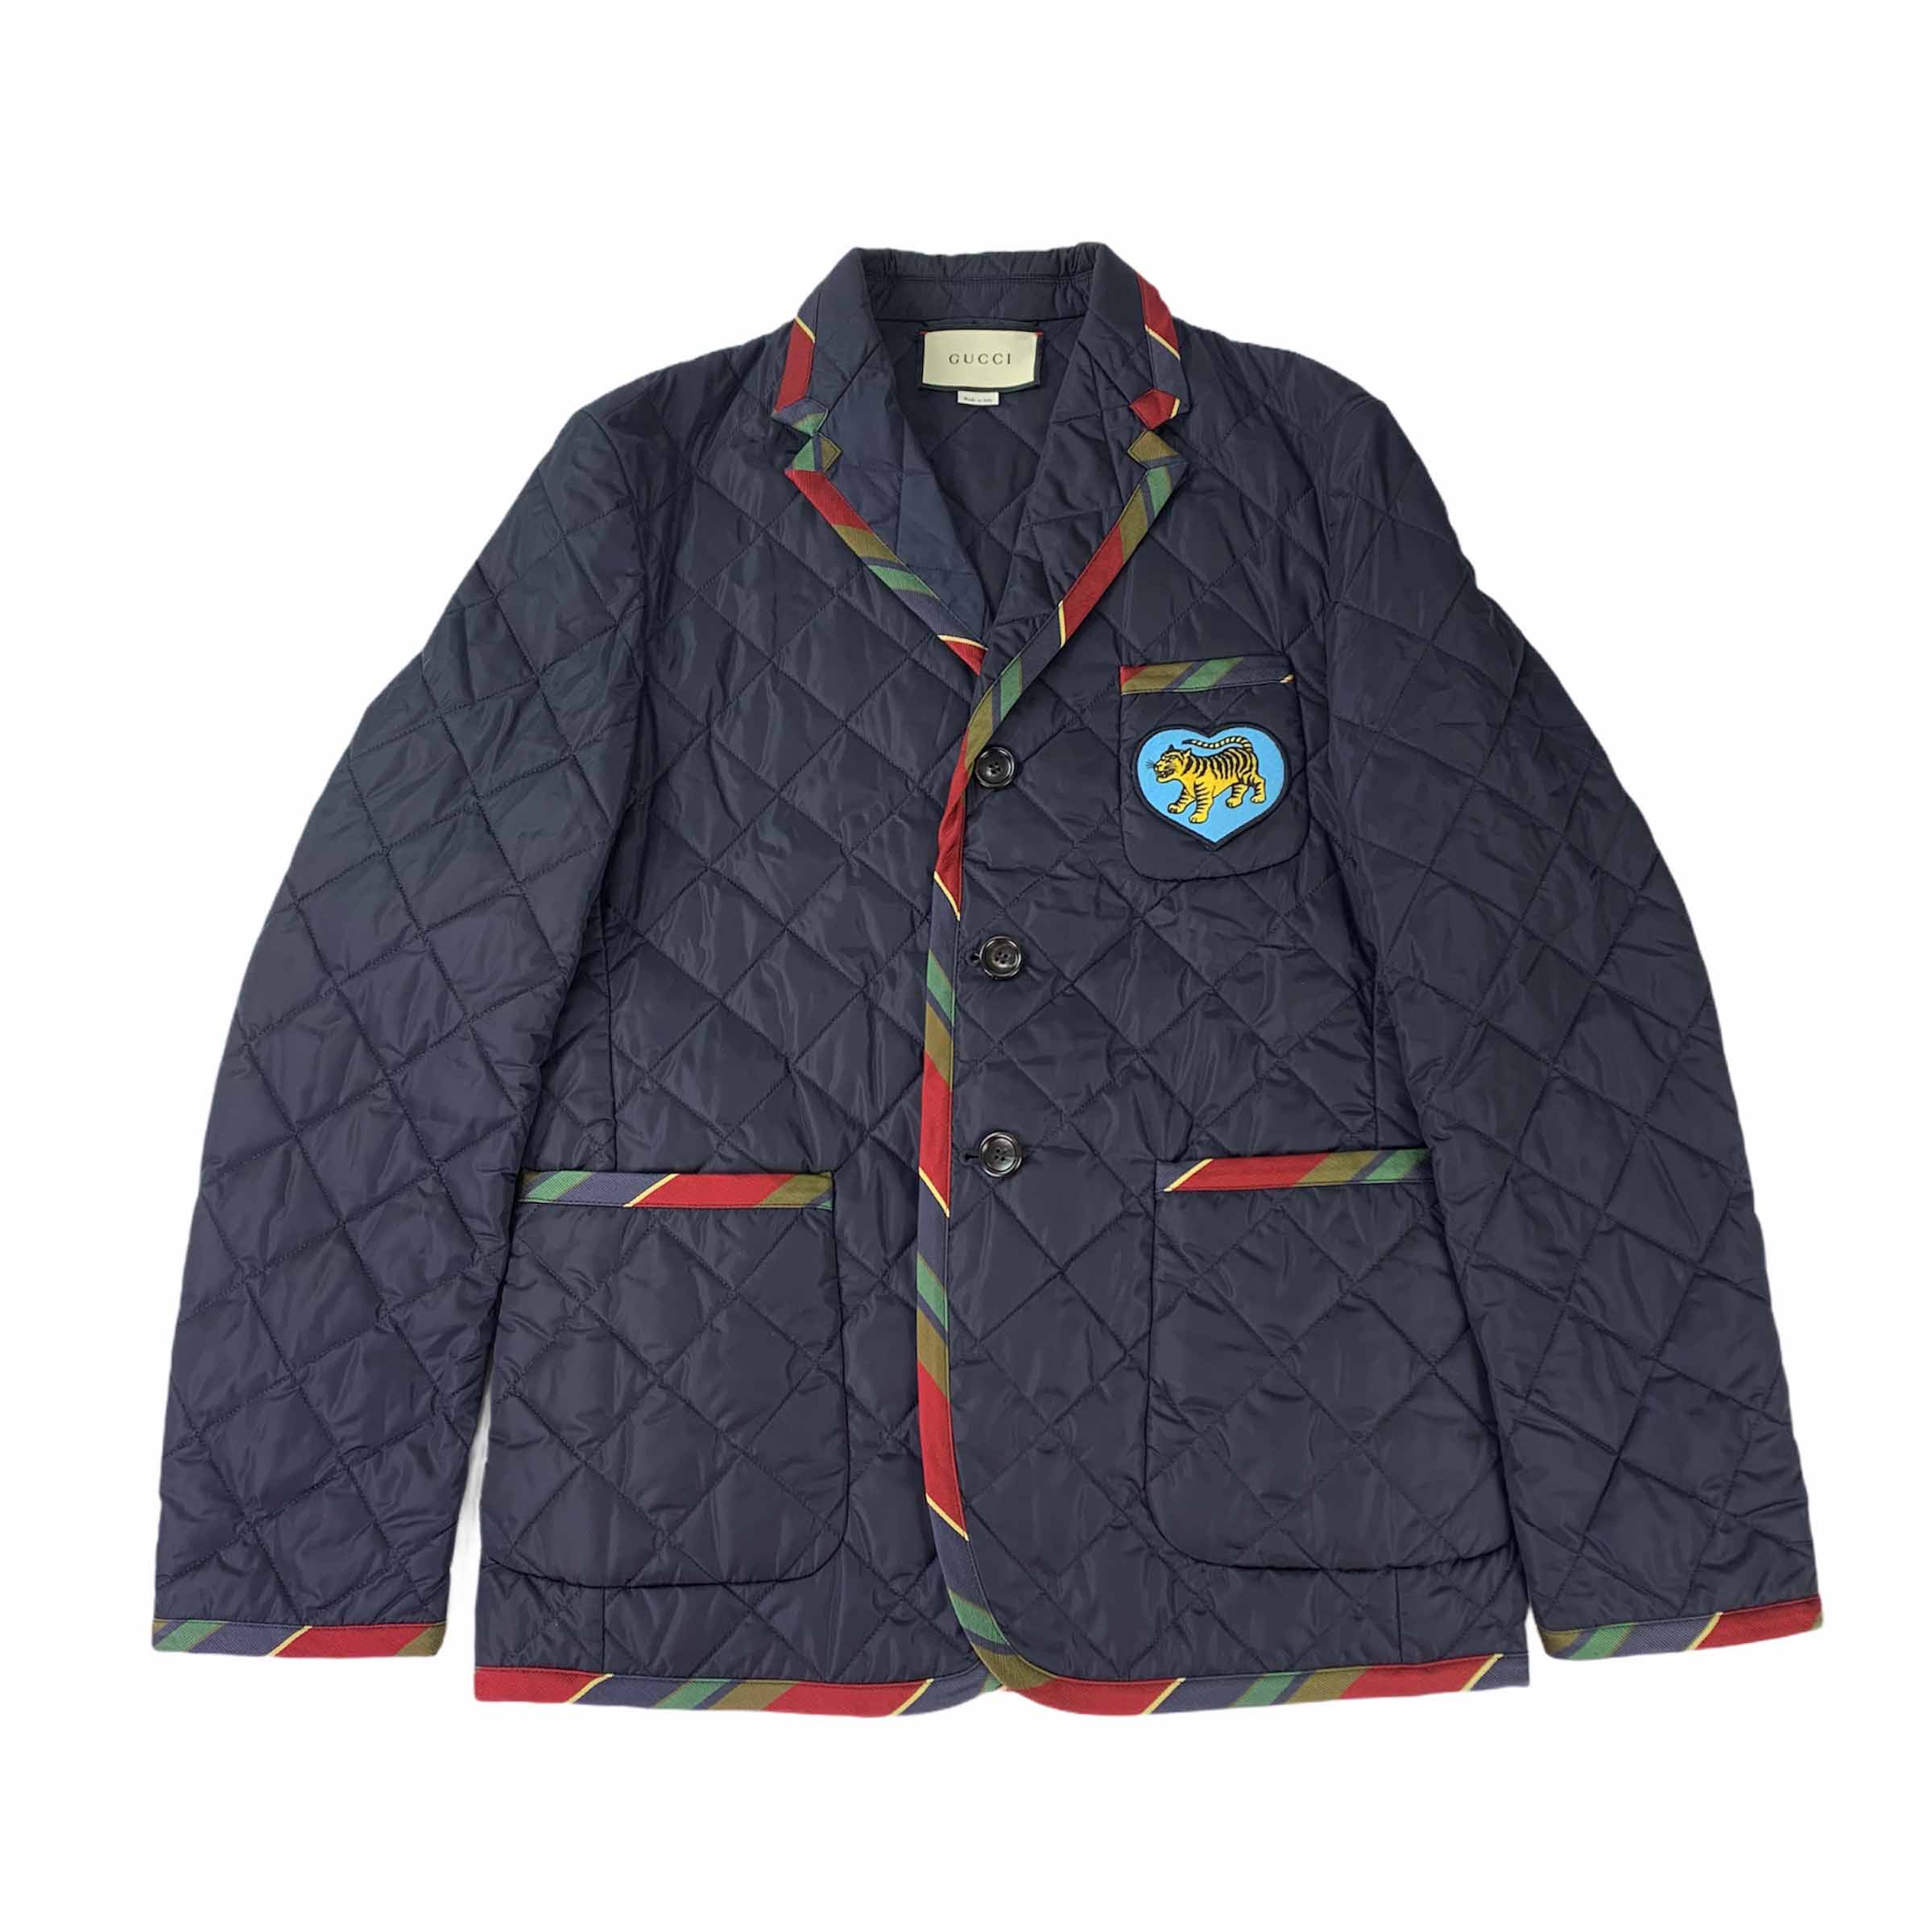 [Gucci] Tiger Embroidered Quilting Jacket - Size 46